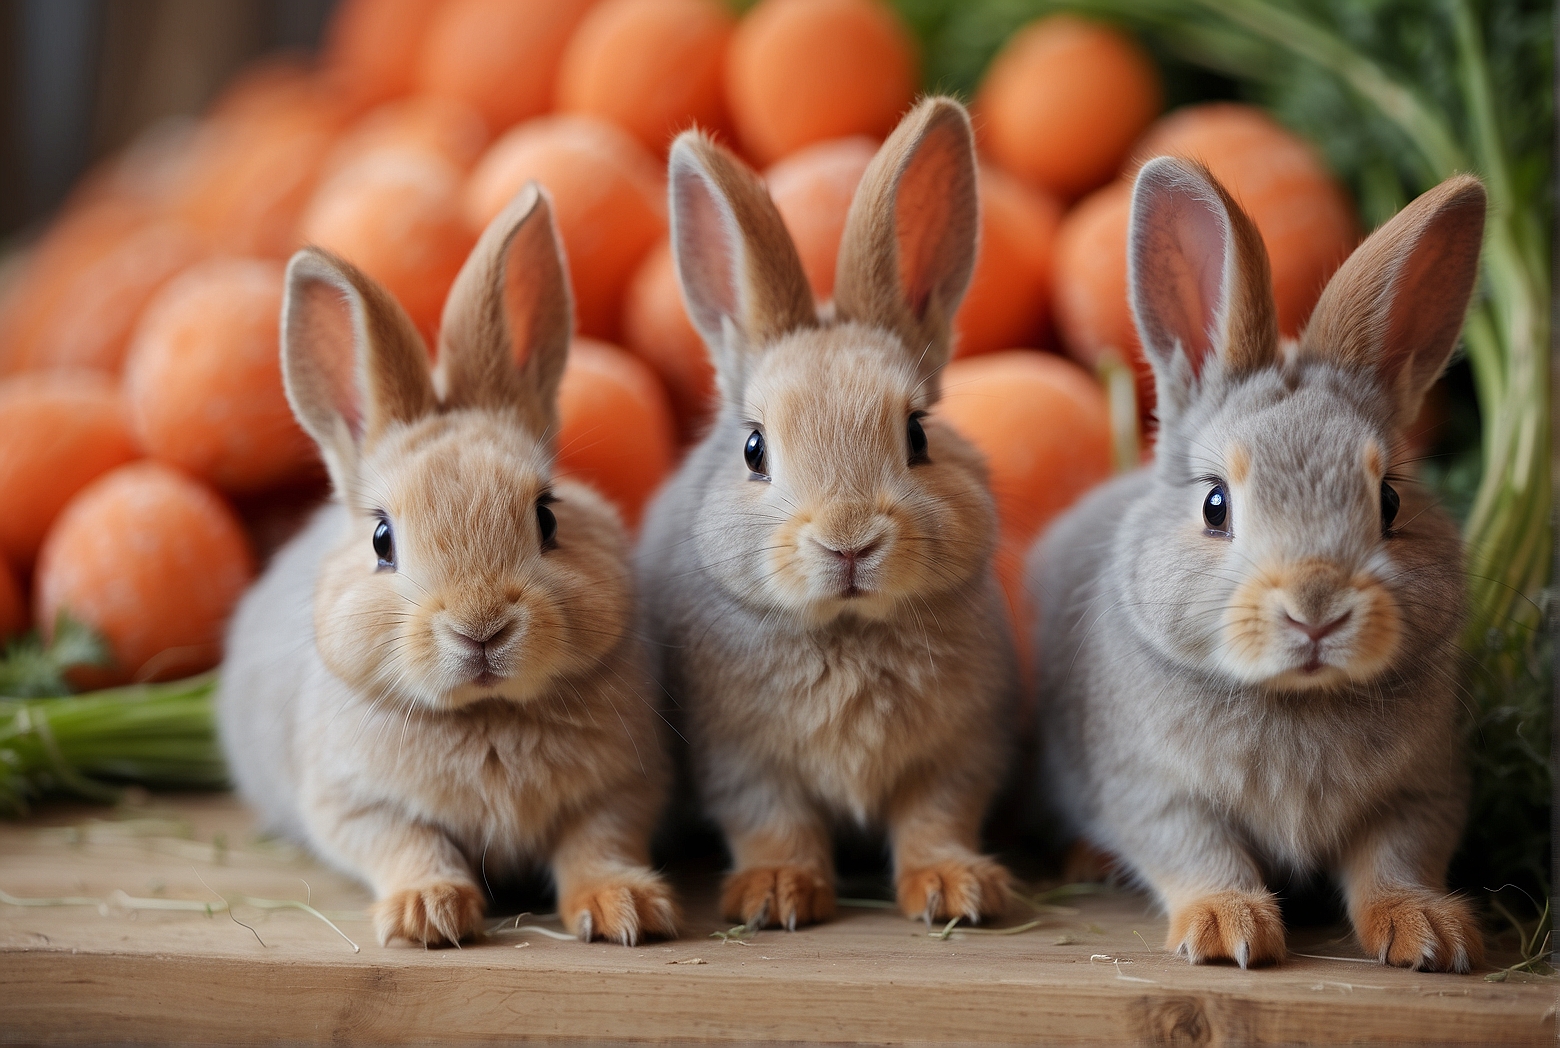 Are Carrots Safe for Netherland Dwarf Rabbits?